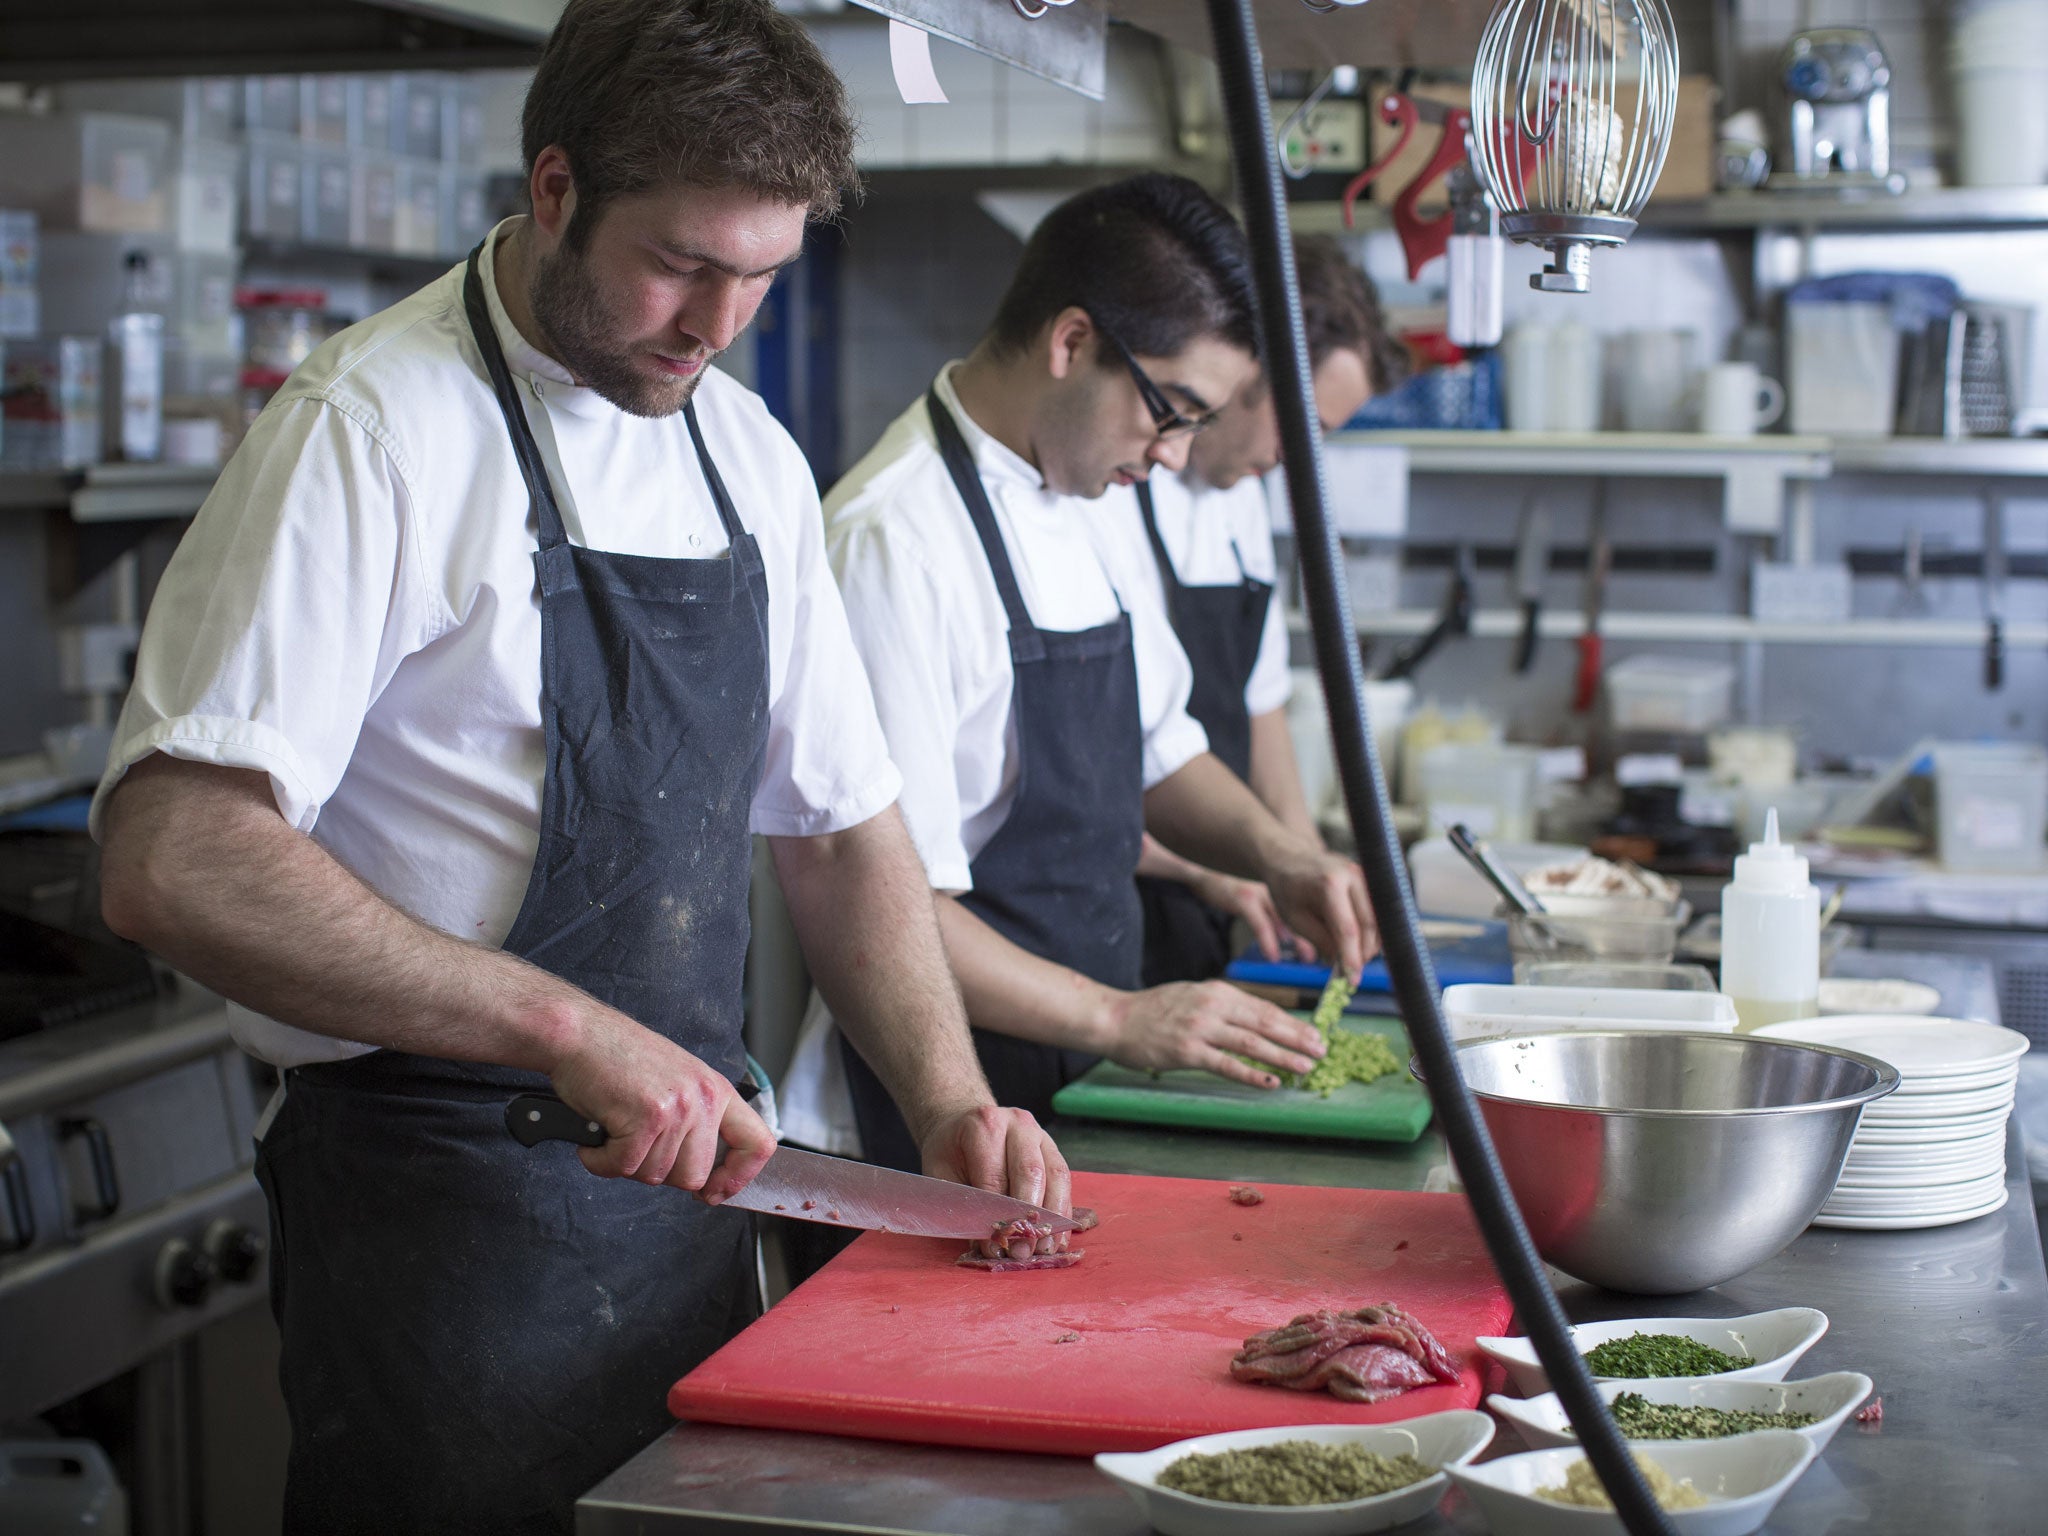 Chef Oliver Gladwin (left) and staff prepare food in The Shed. But restaurants are facing a staffing squeeze